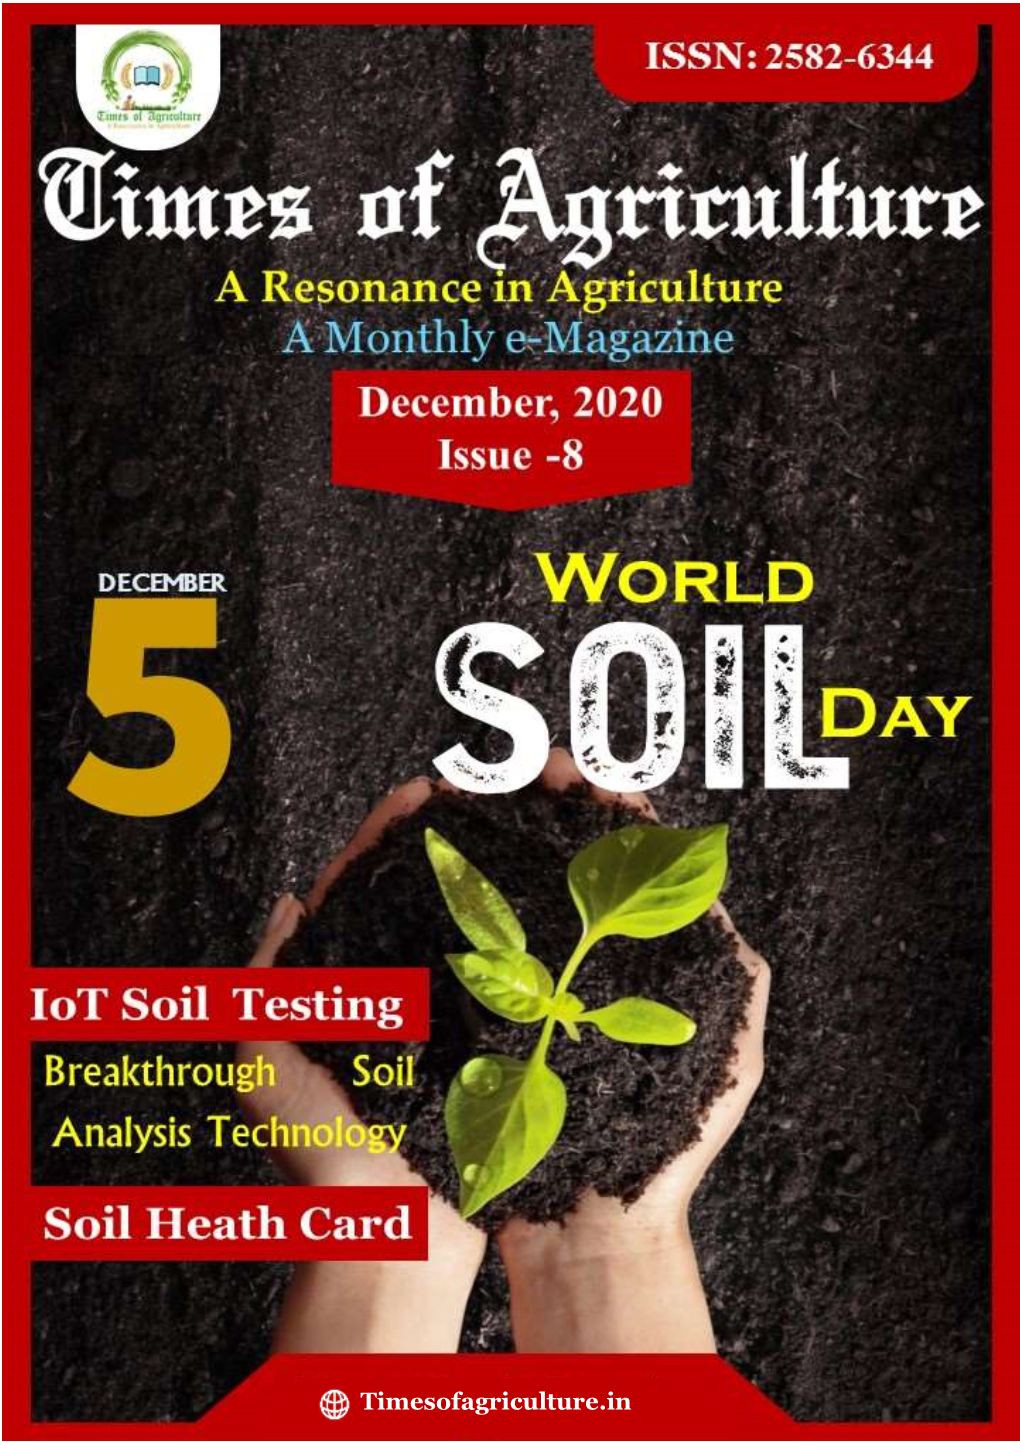 Automated Soil Testing